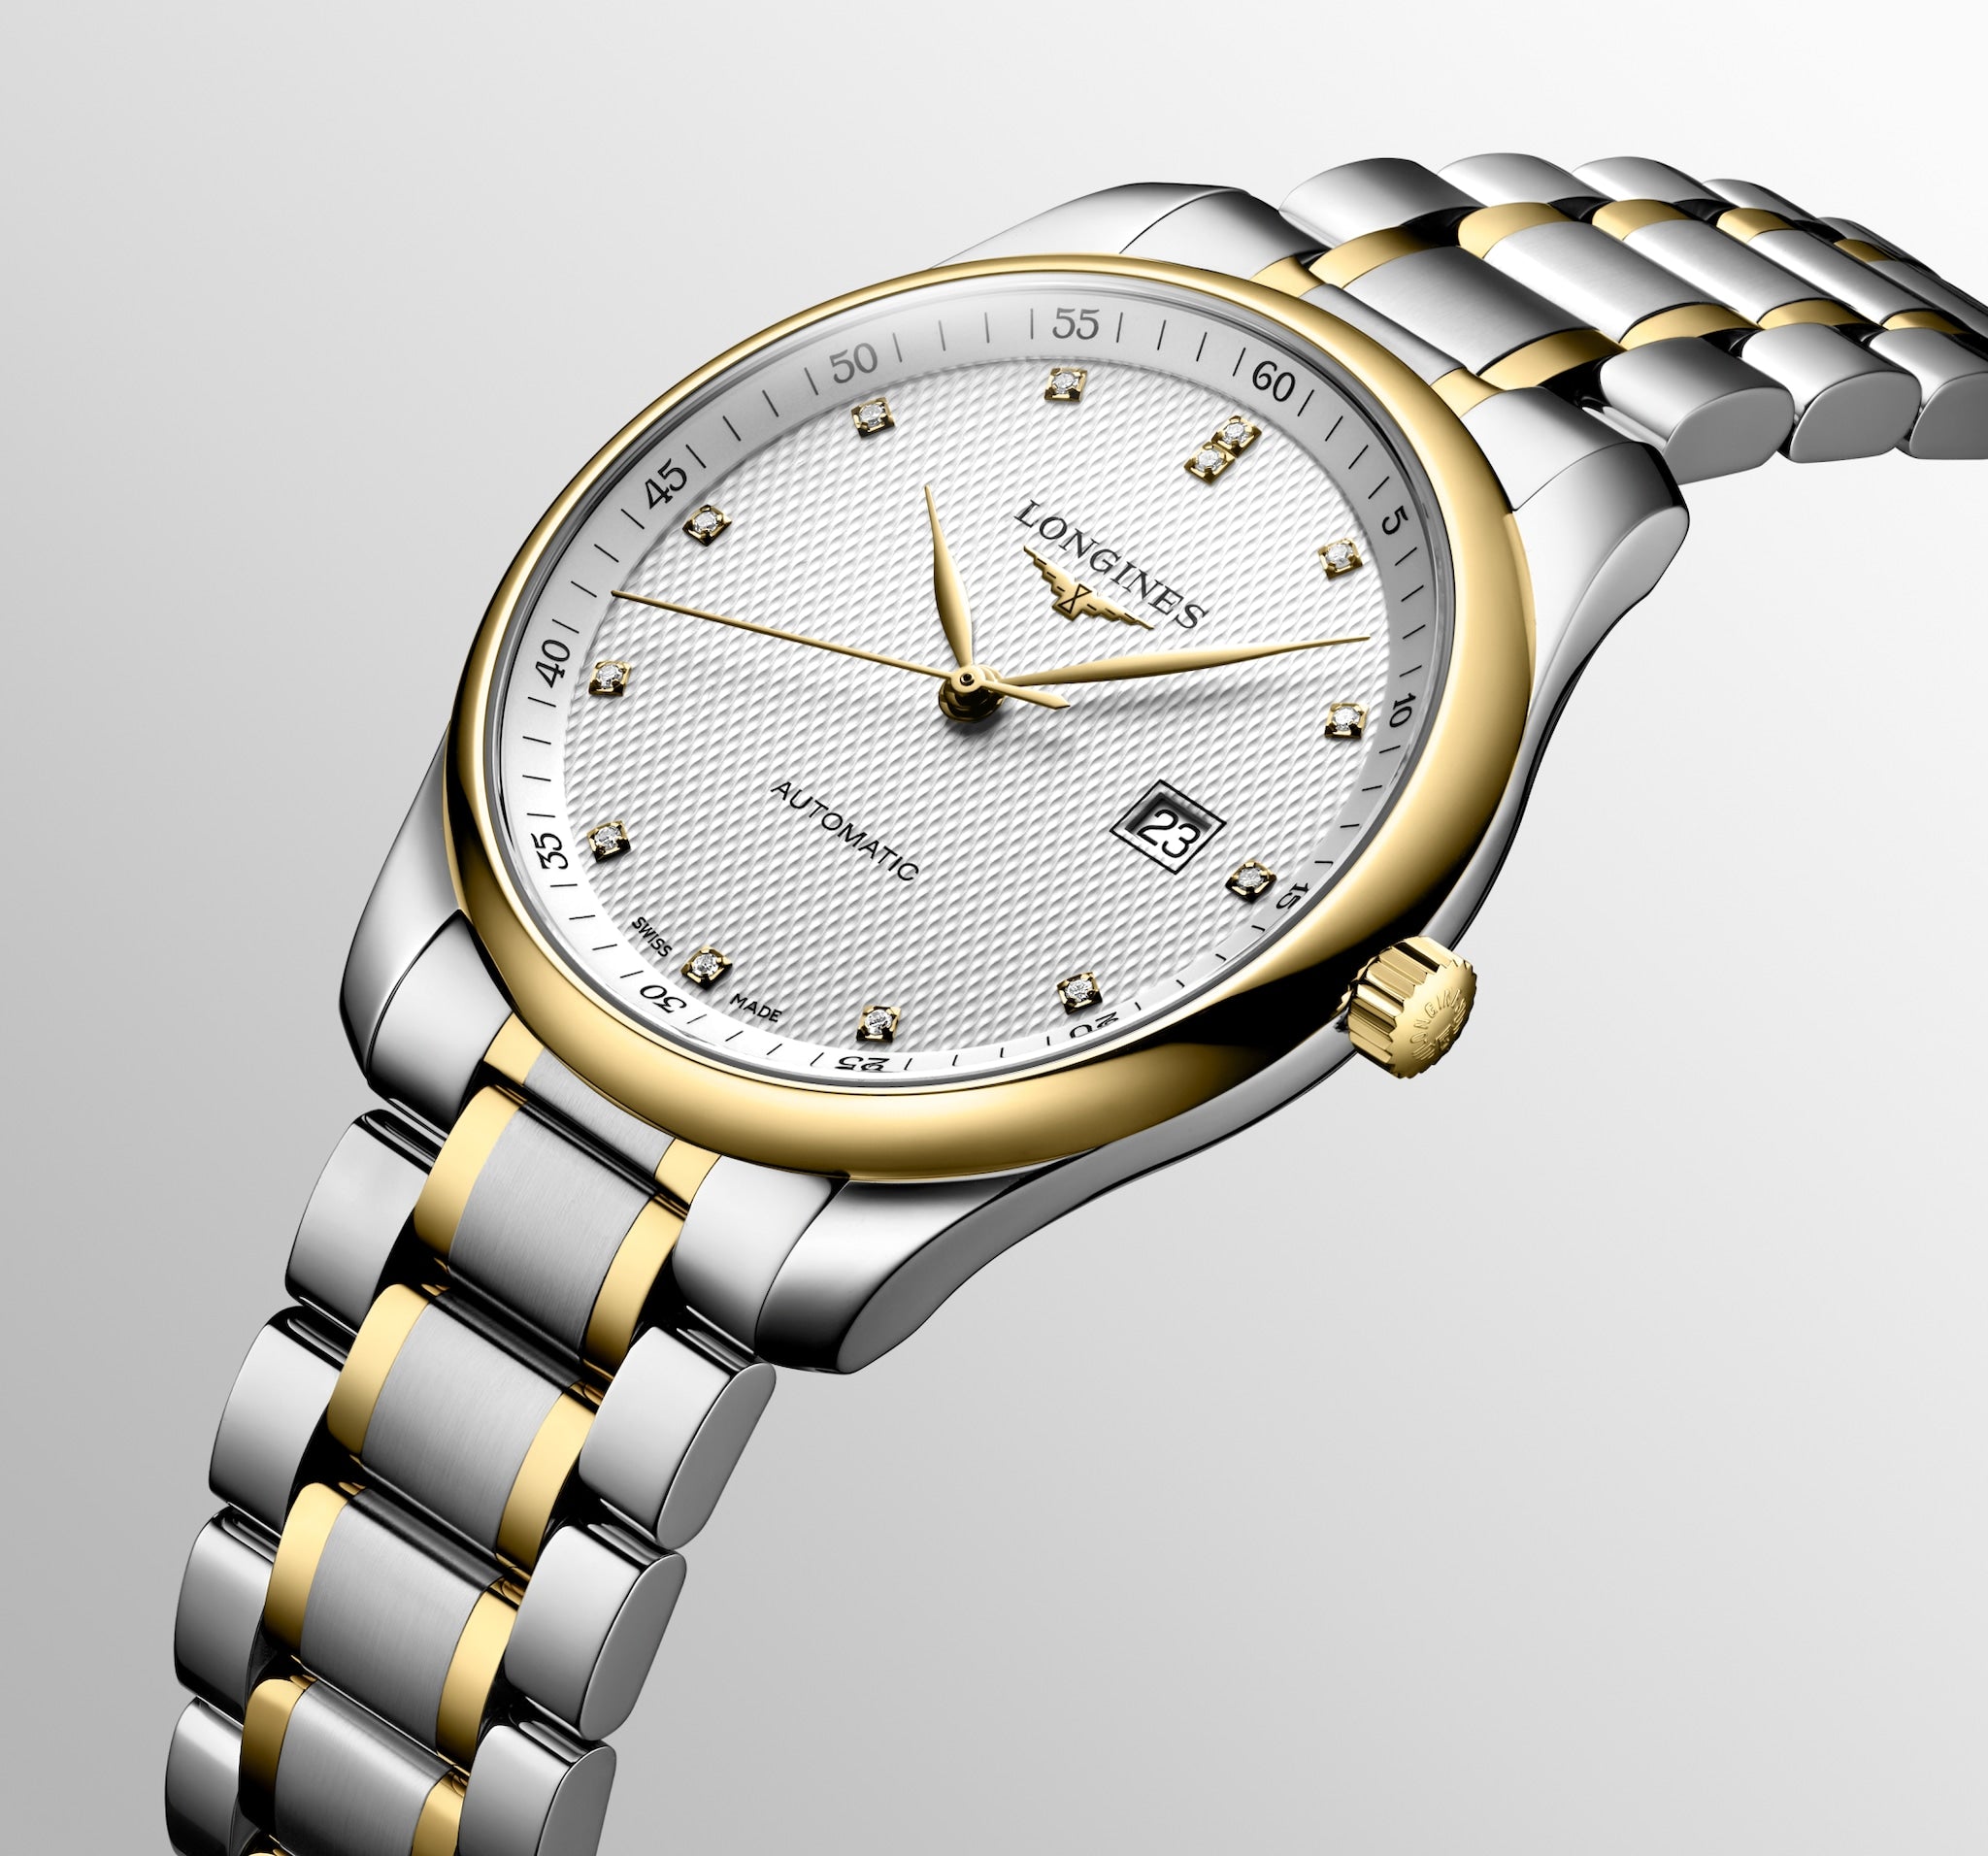 THE LONGINES MASTER COLLECTION L2.893.5.97.7